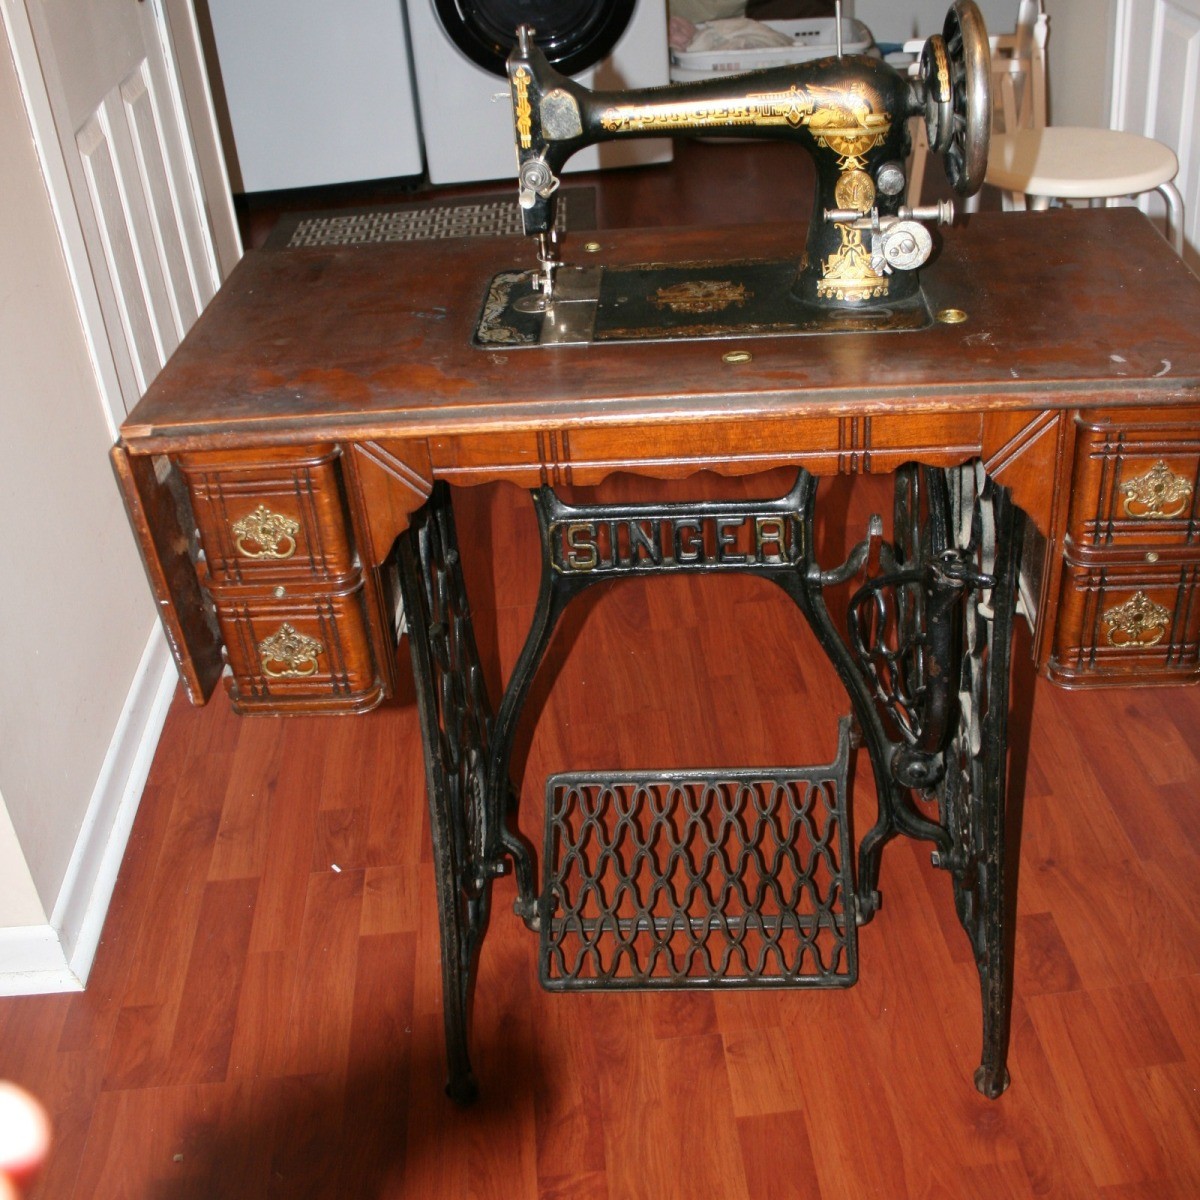 Singer Treadle Sewing Machine, Old Singer Sewing Machine In Wood Cabinet